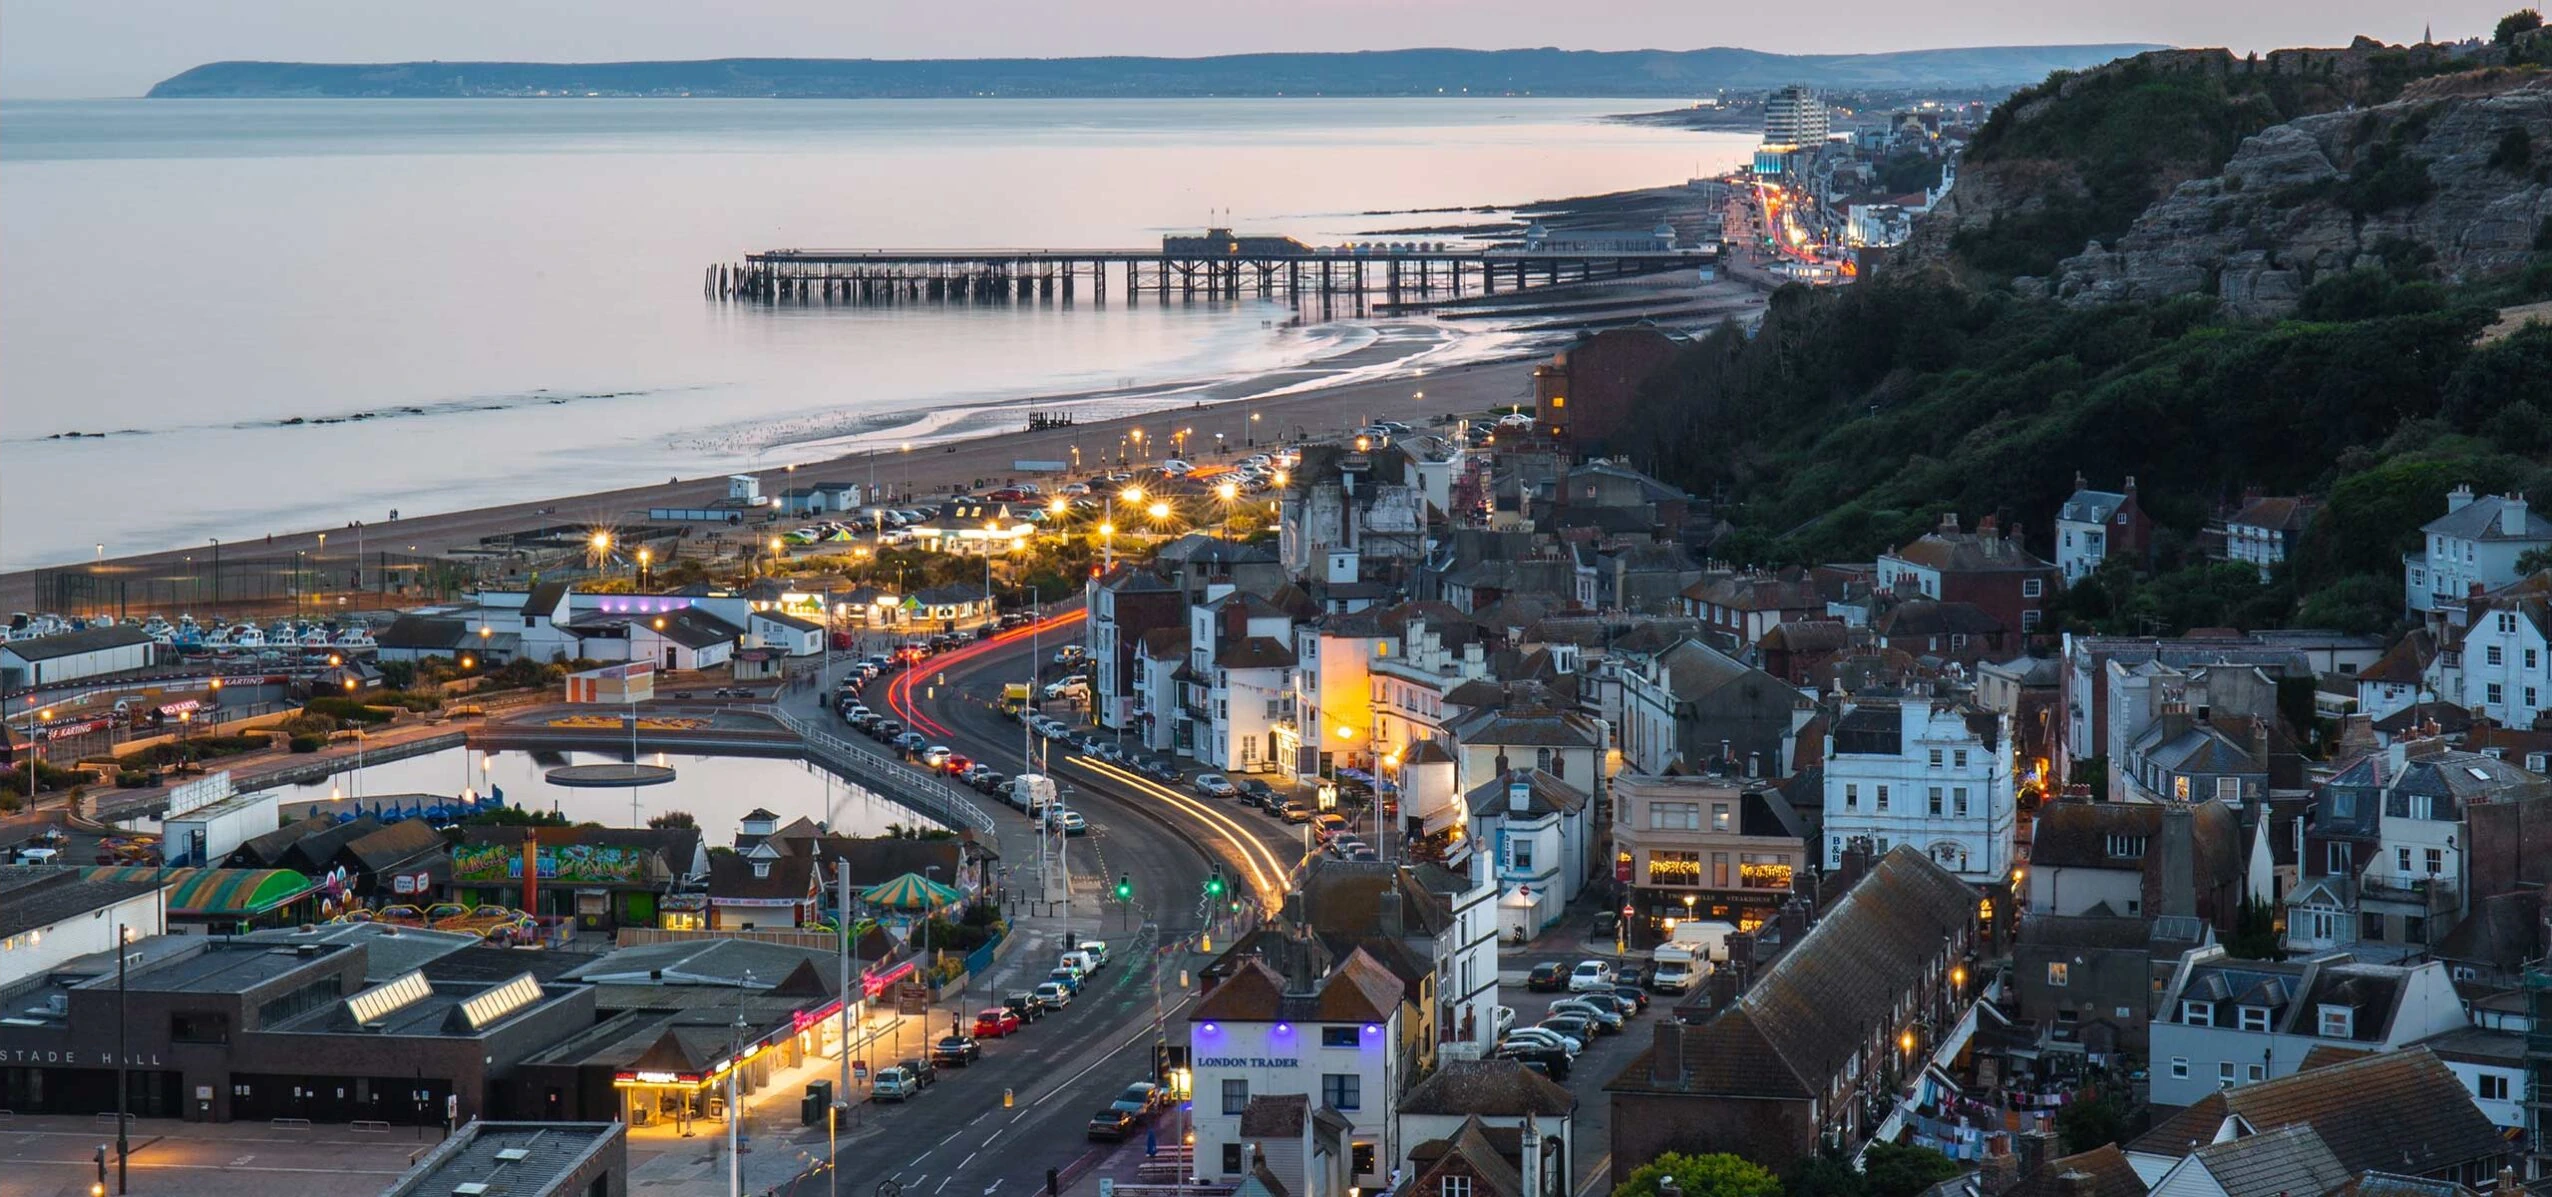 Hastings seafront and old town at dusk